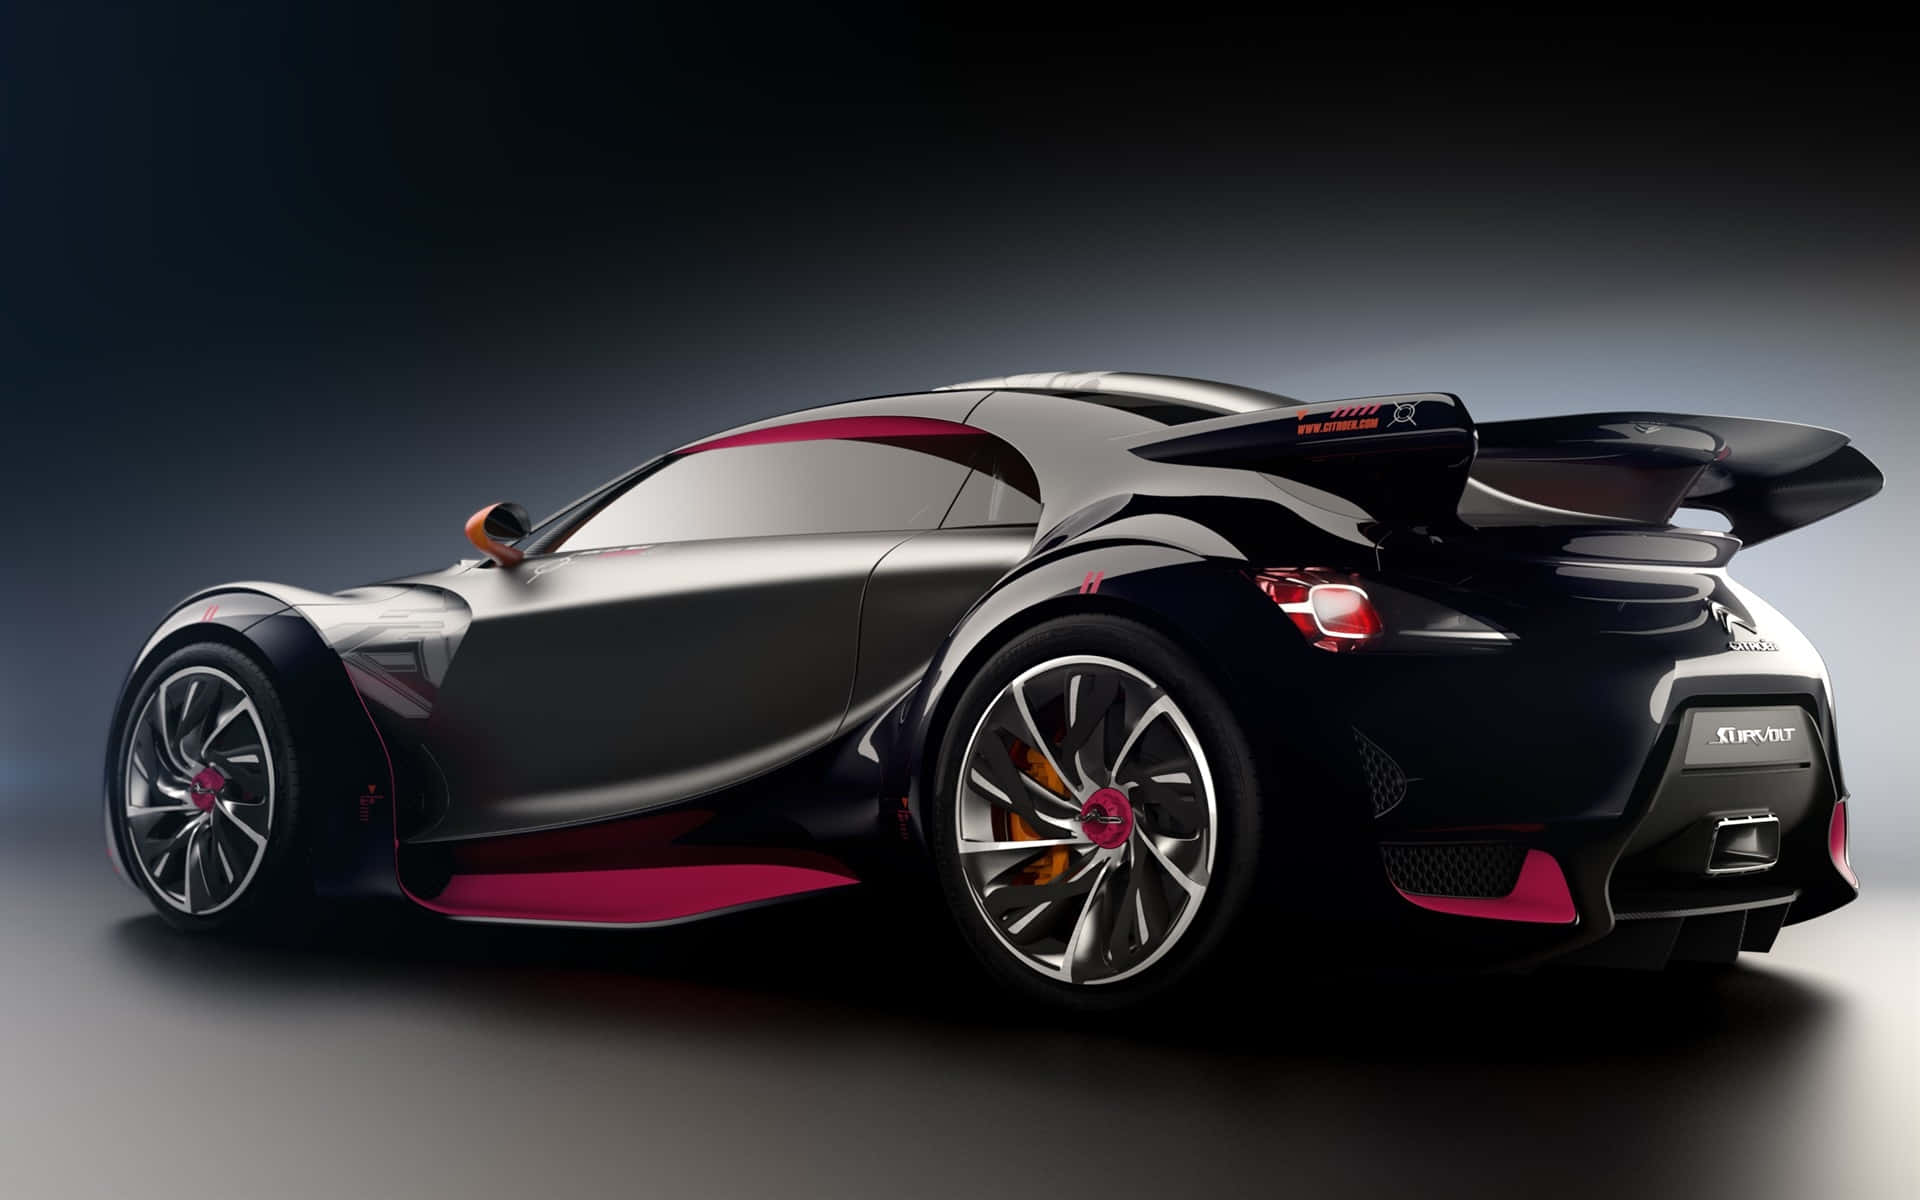 A Black And Pink Sports Car Is Shown In A Dark Room